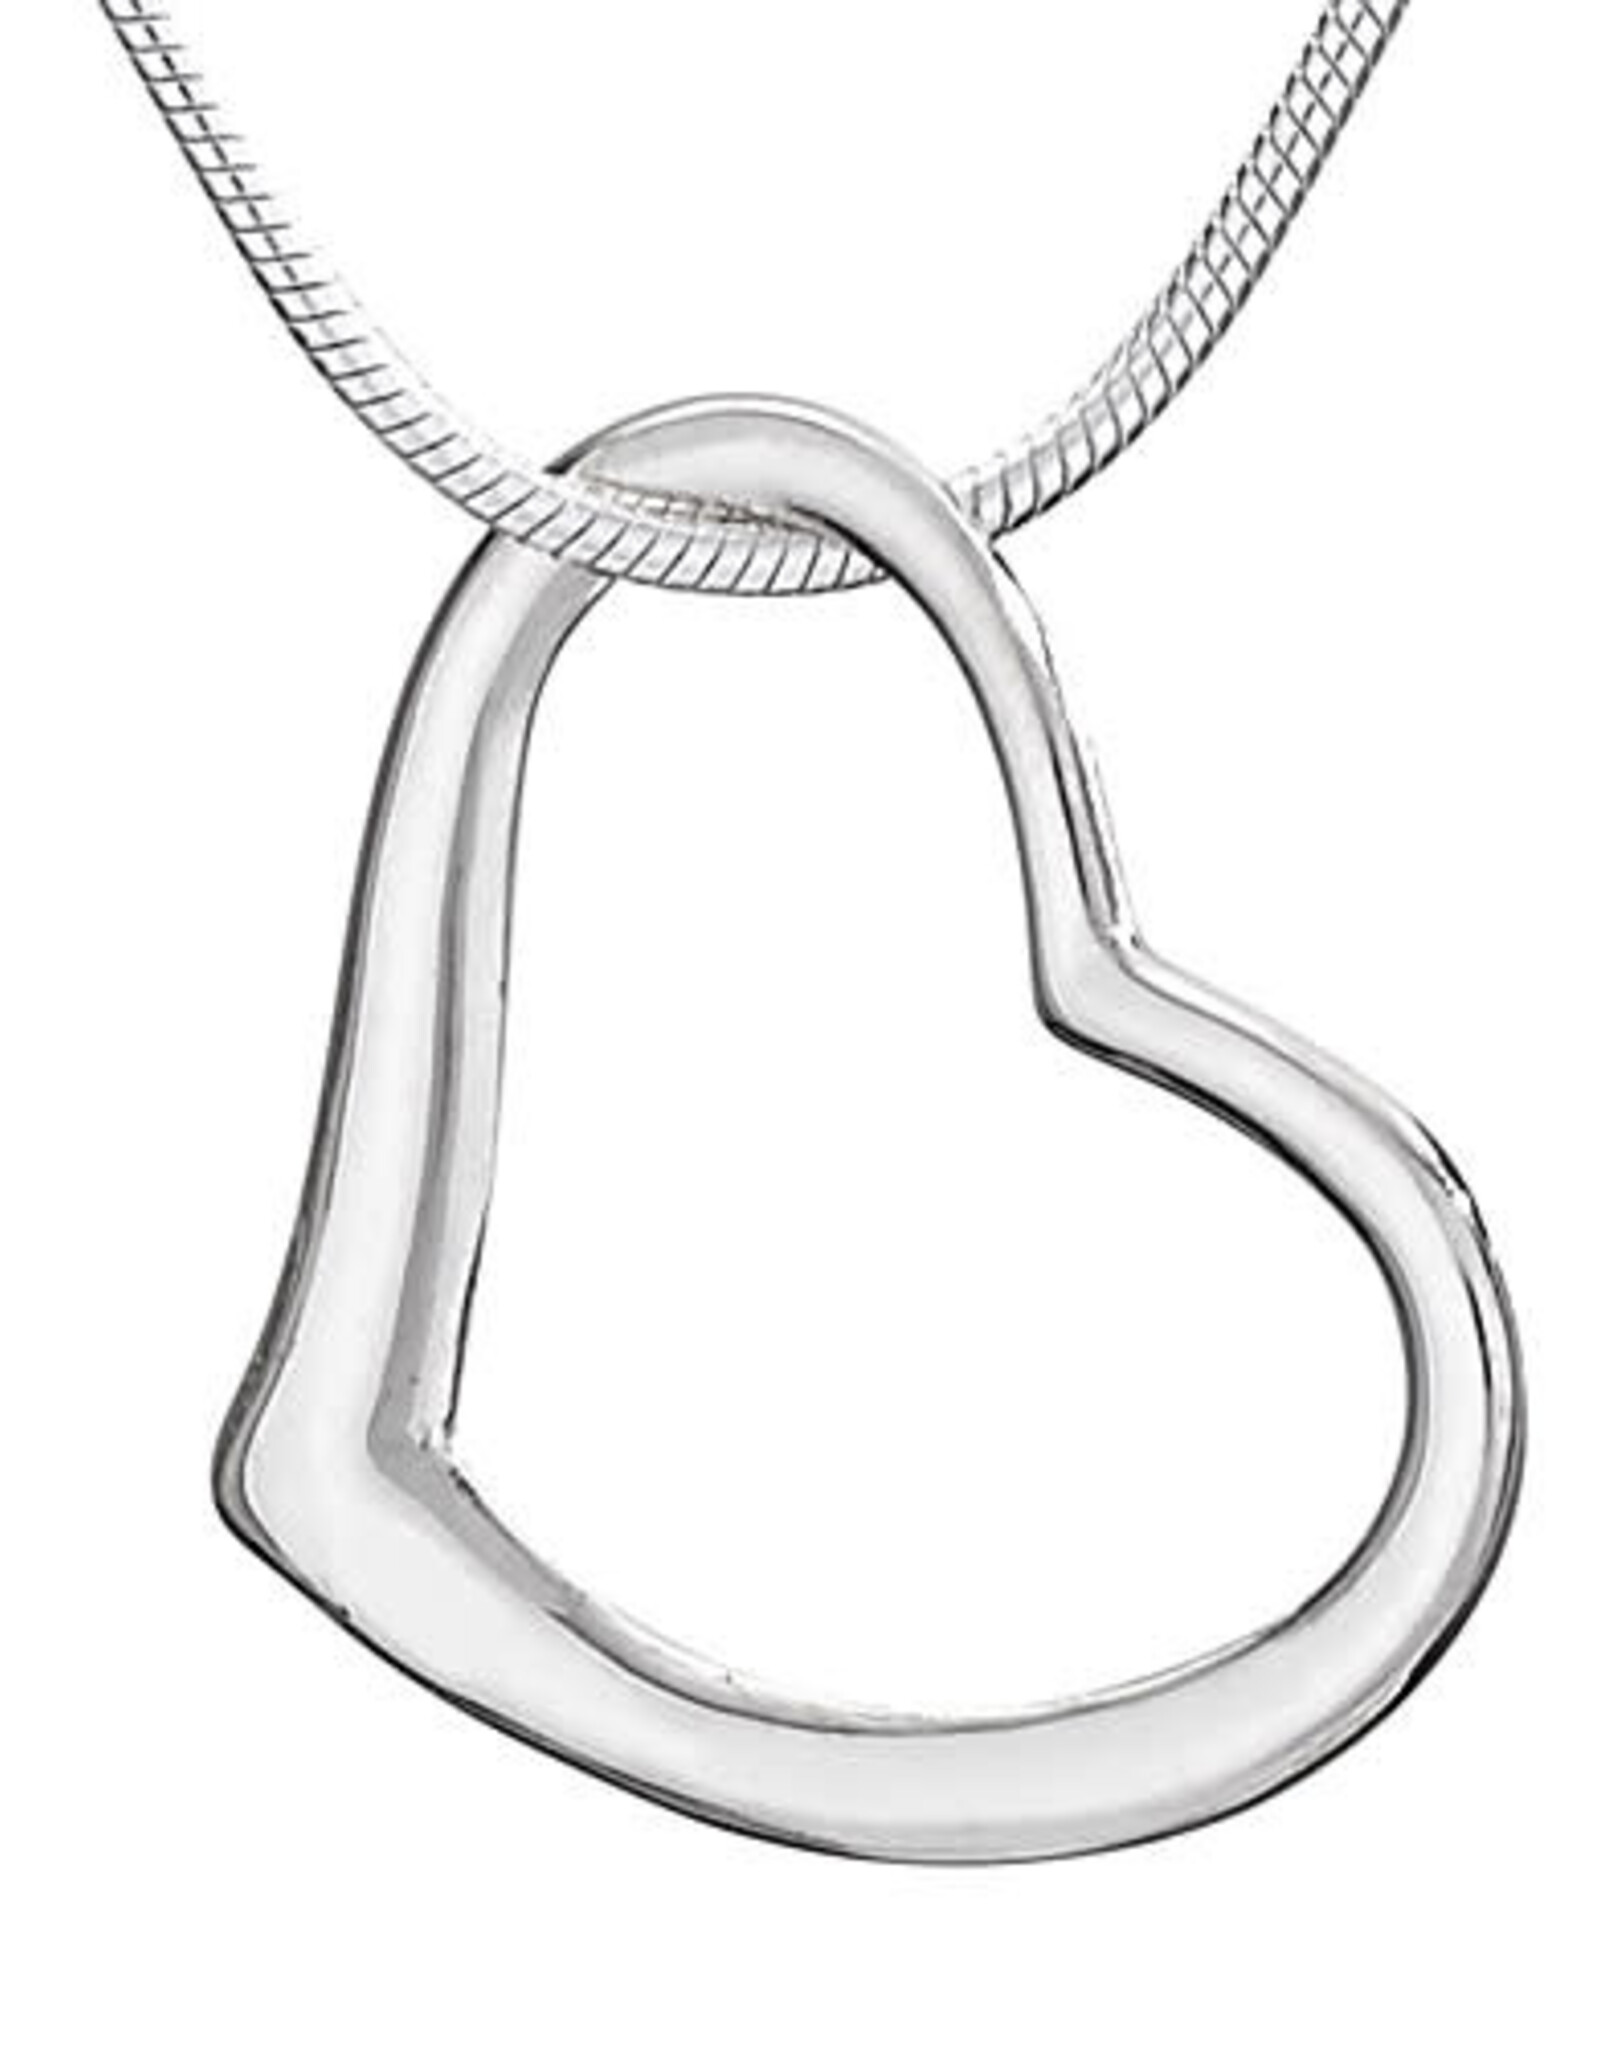 Tiger Mountain FLOATING HEART NECKLACE - sterling silver